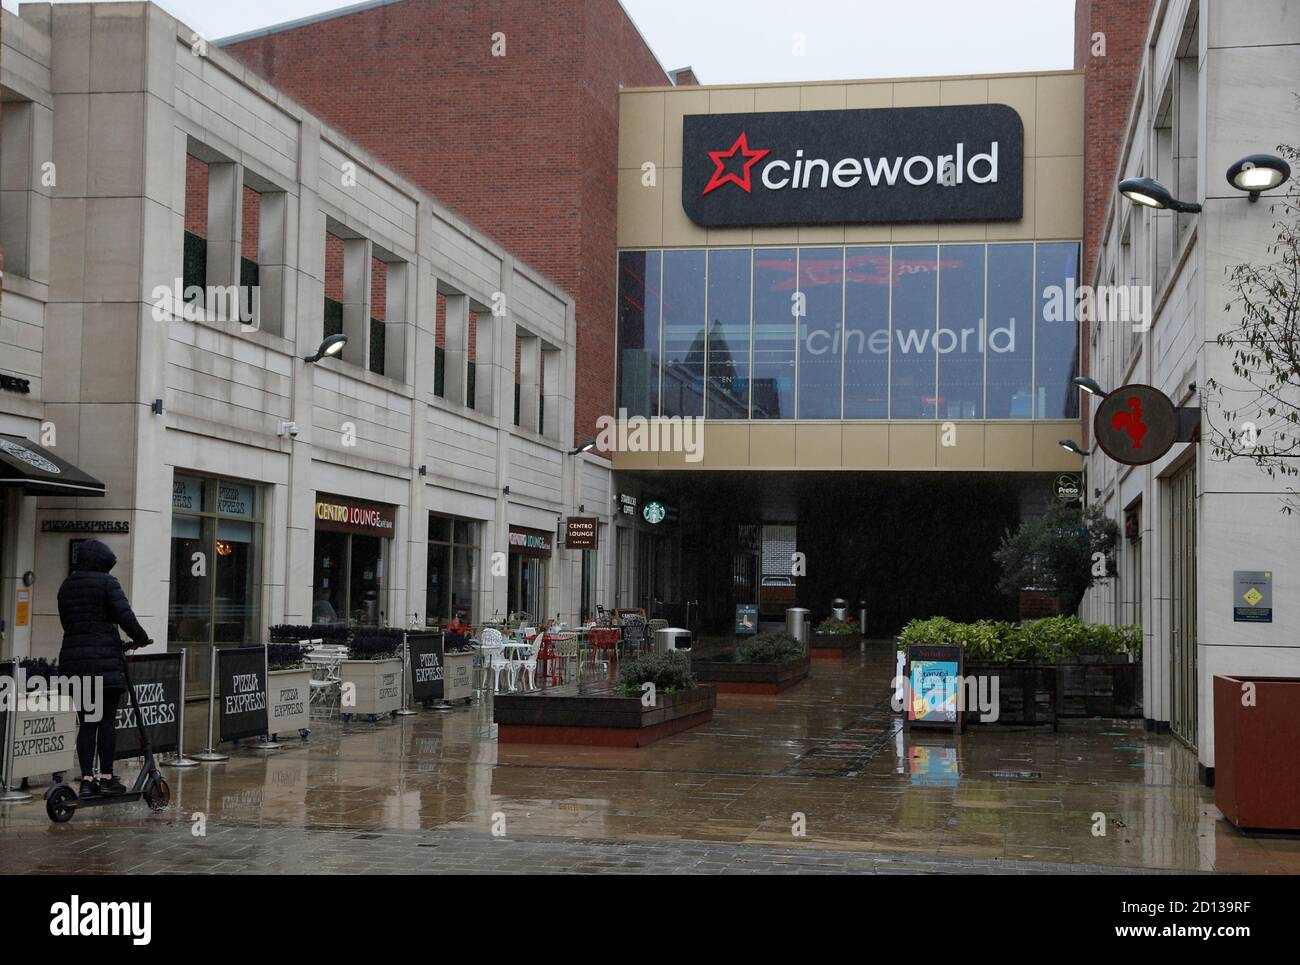 Loughborough, Leicestershire, UK. 5th October 2020. A woman scoots past a Cineworld cinema after it was announced that because of continuing disruption from the coronavirus pandemic its screens would close until next year. Credit Darren Staples/Alamy Live News. Stock Photo